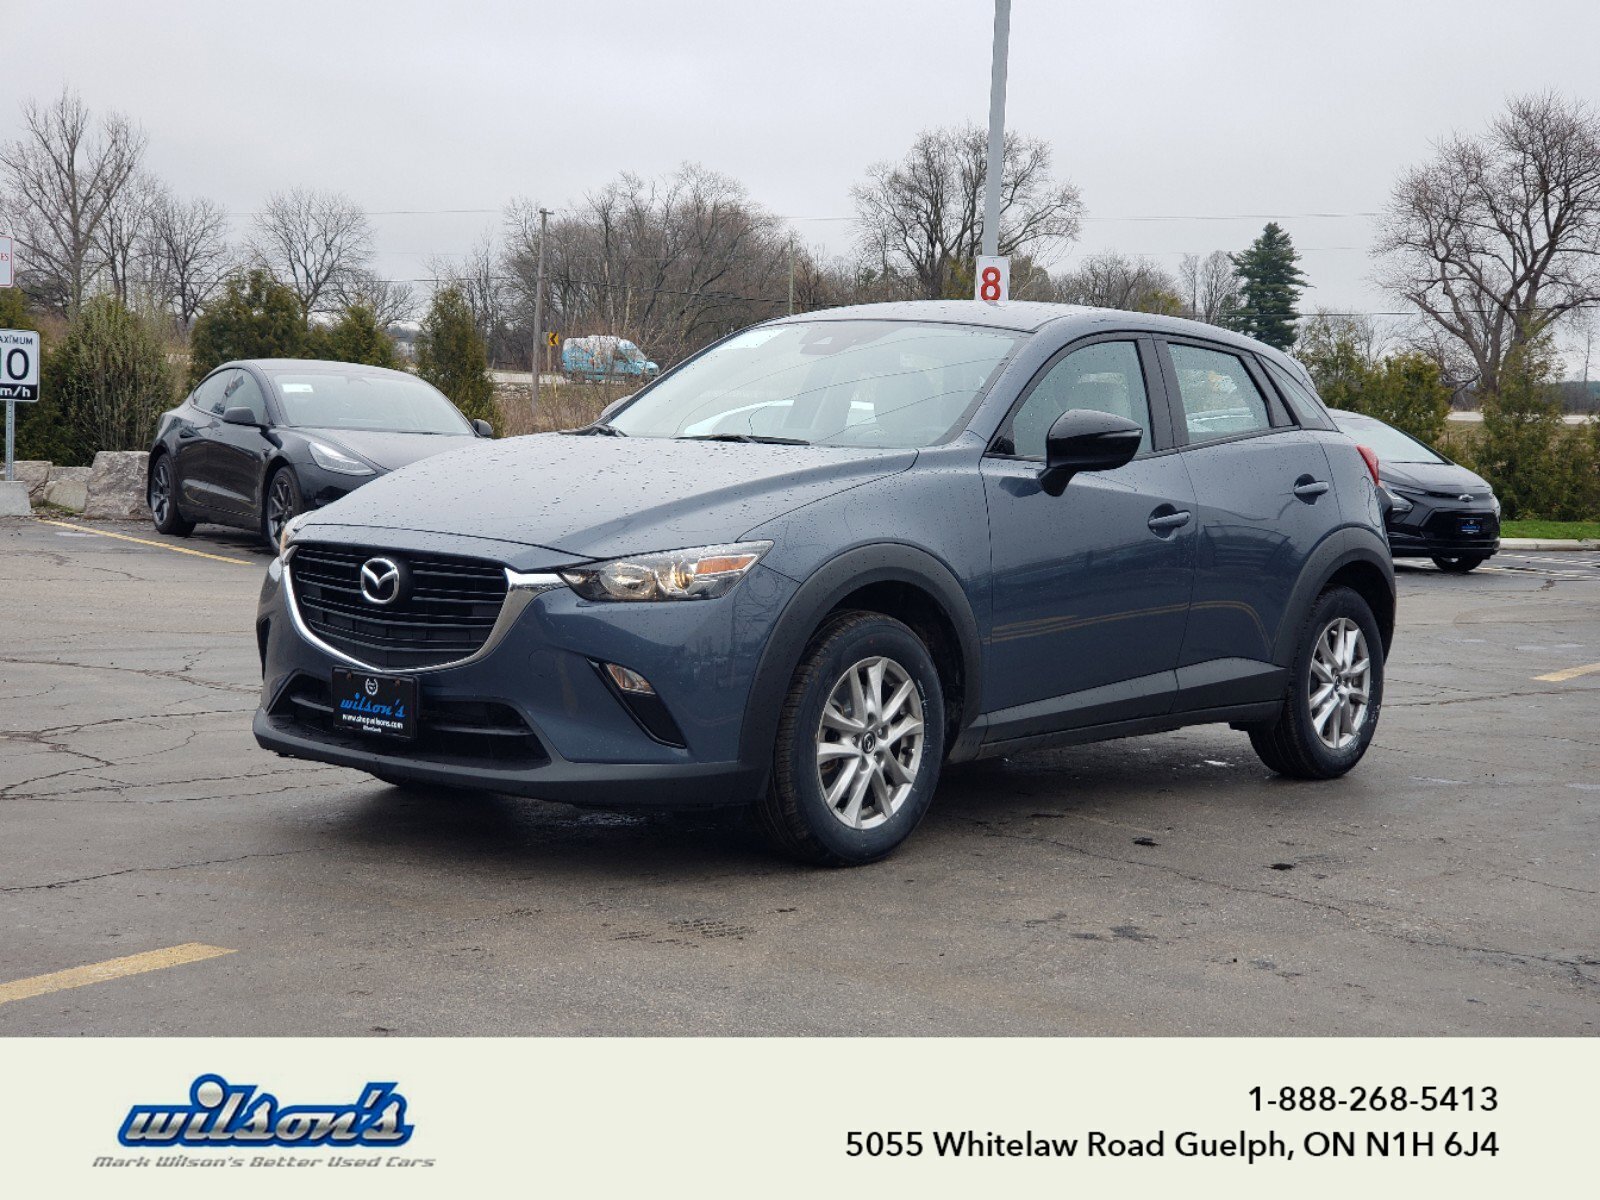 2021 Mazda CX-3 GS AWD, Leather/Suede, Heated Seats, Custom Appear